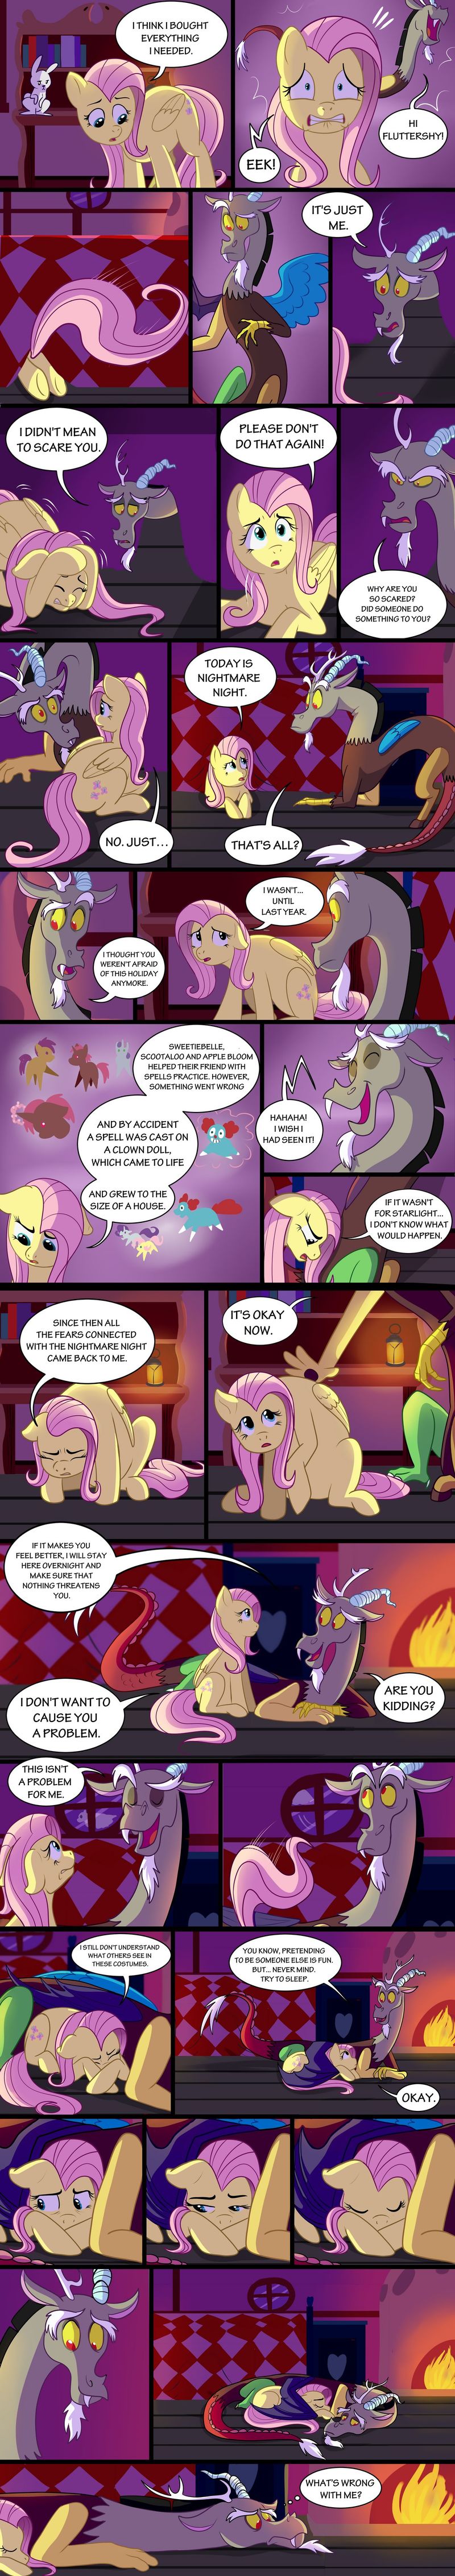 Page 4-7: Fluttershy is scared